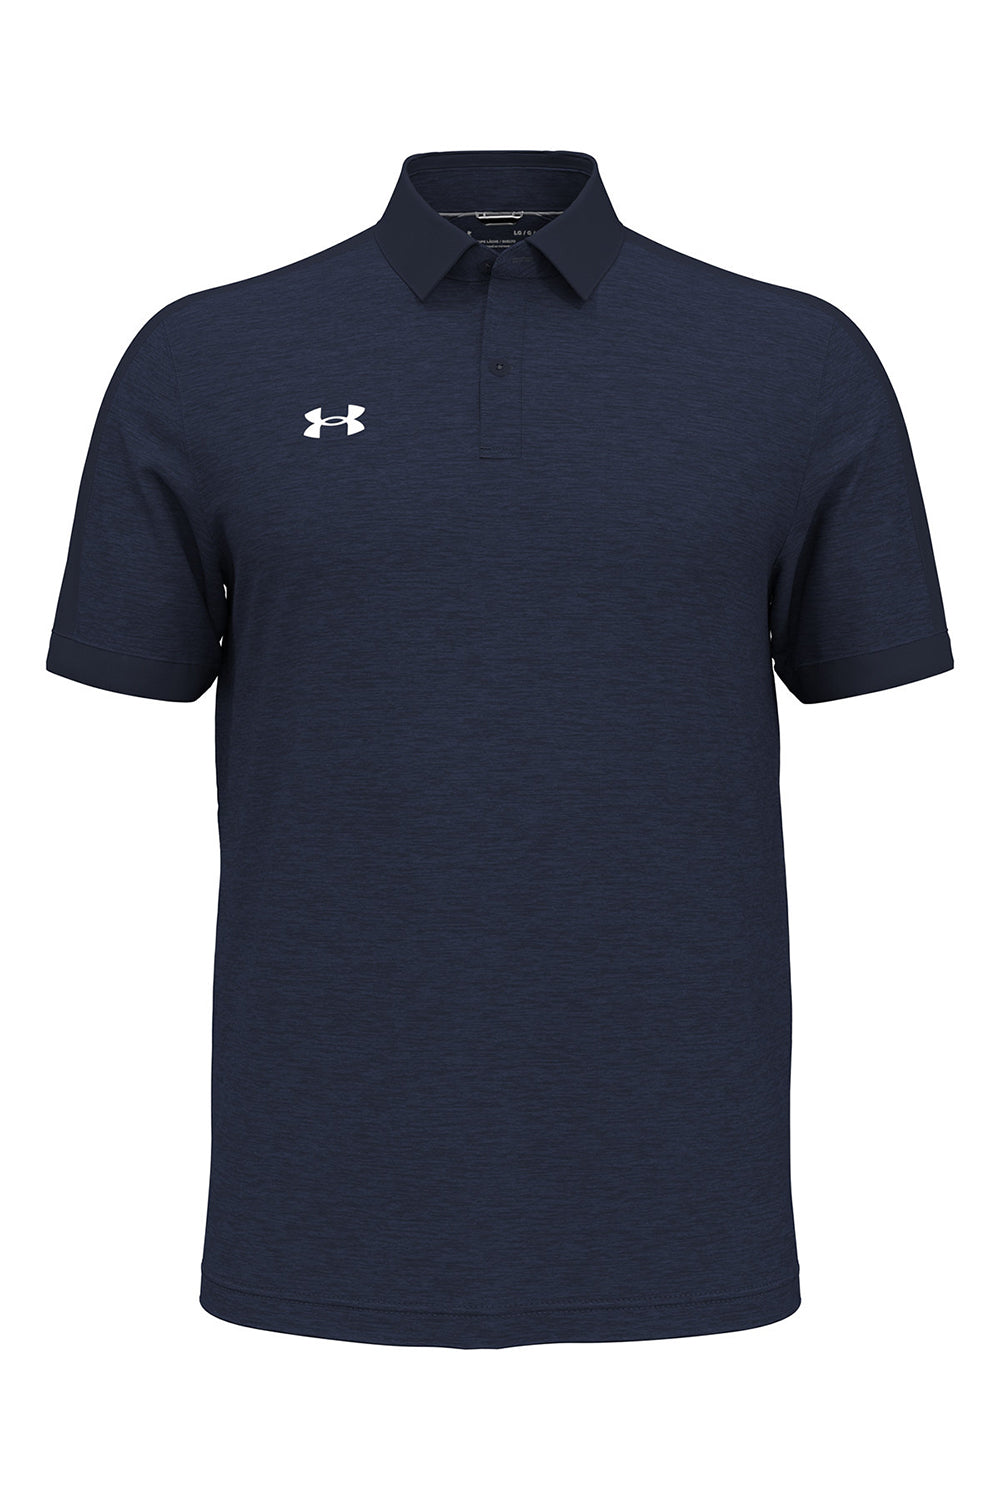 Under Armour 1376907 Mens Trophy Level Moisture Wicking Short Sleeve Polo Shirt Midnight Navy Blue Flat Front